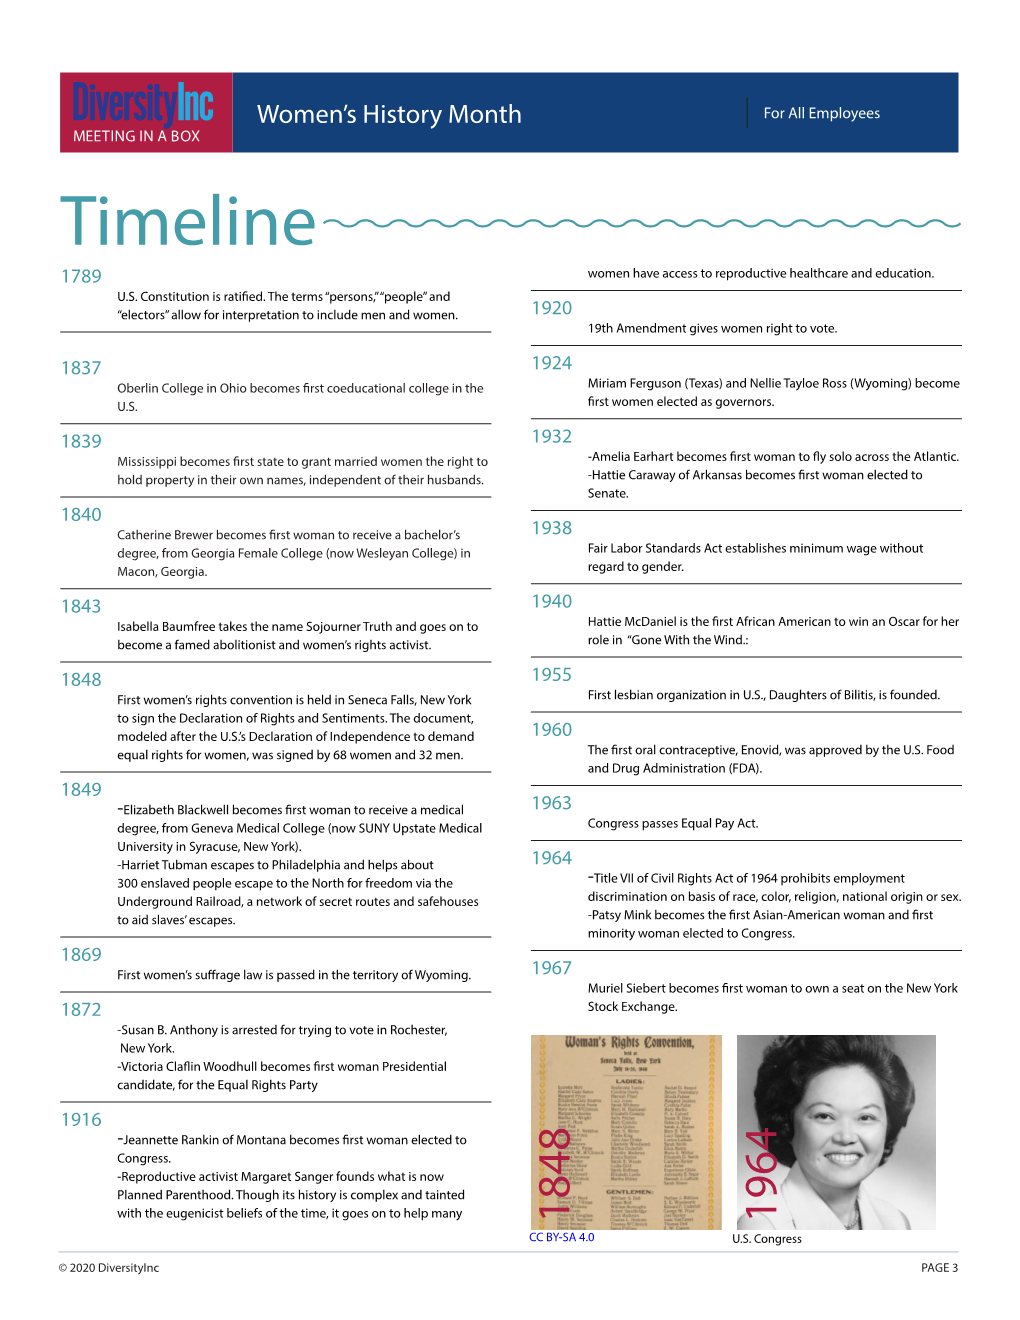 Timeline 1789 Women Have Access to Reproductive Healthcare and Education